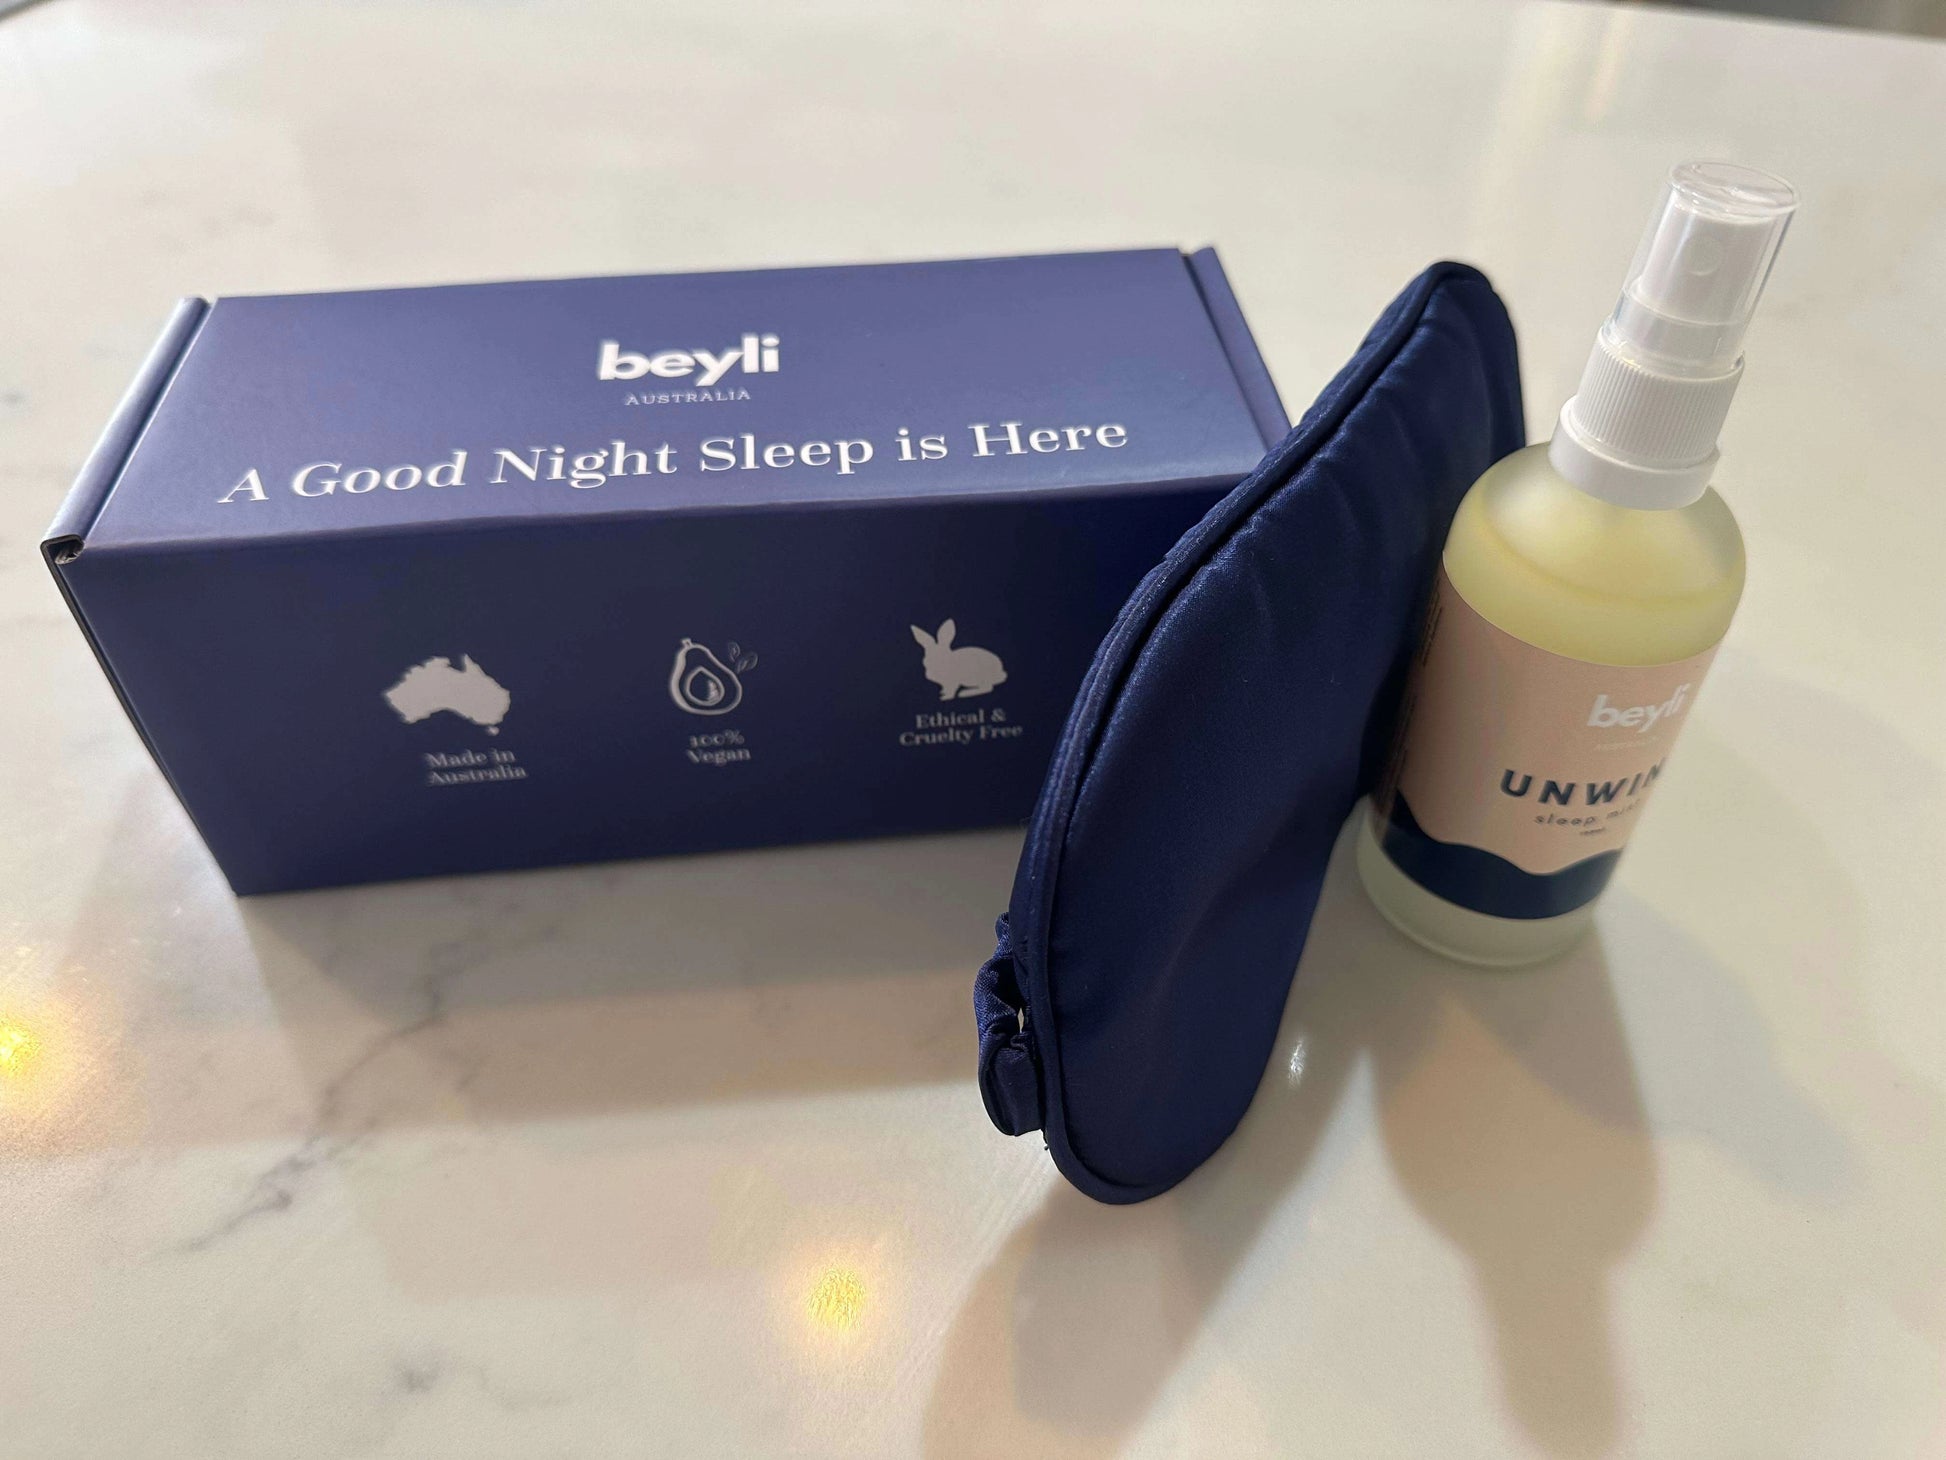 A promotional image for the Better Sleep Mist & Mask Bundle with a calming message